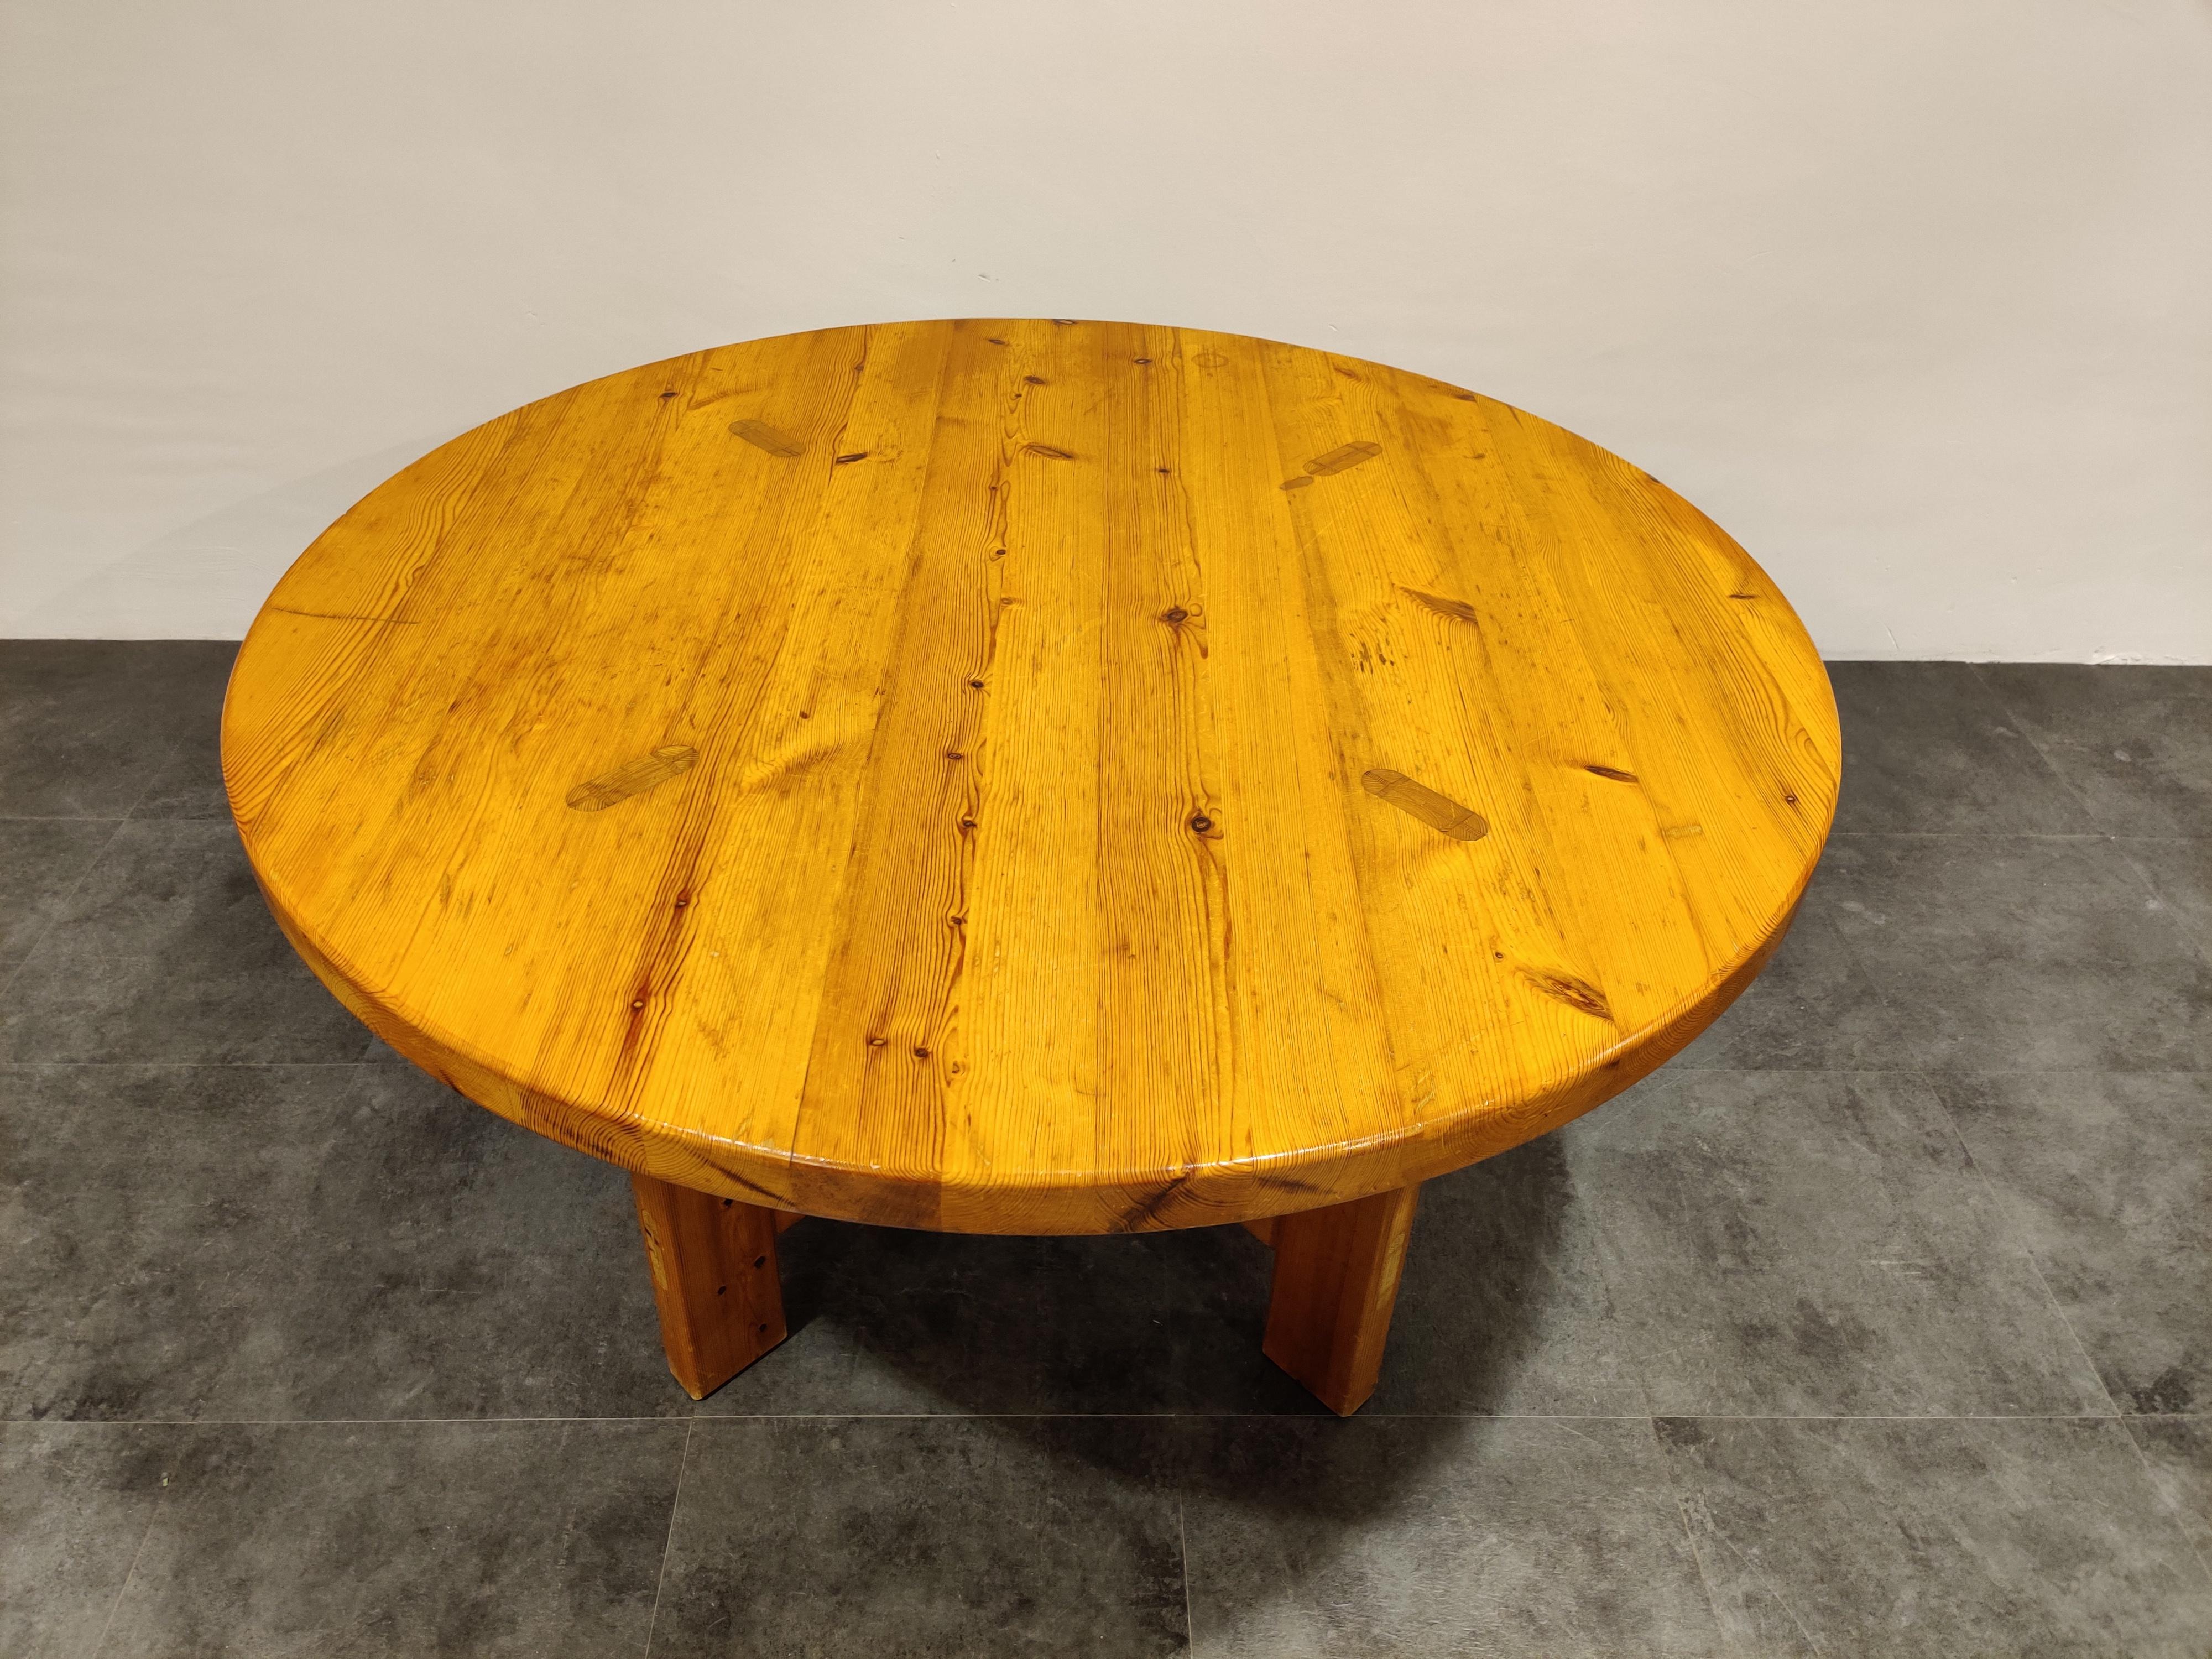 Up for sale is this beautiful and timeless Scandinavian dining table designed by Roland Wilhelmsson model 'RW152'.

The table is assembled with great craftsmanship, no screws were used.

It features an everlasting thick solid pine wooden